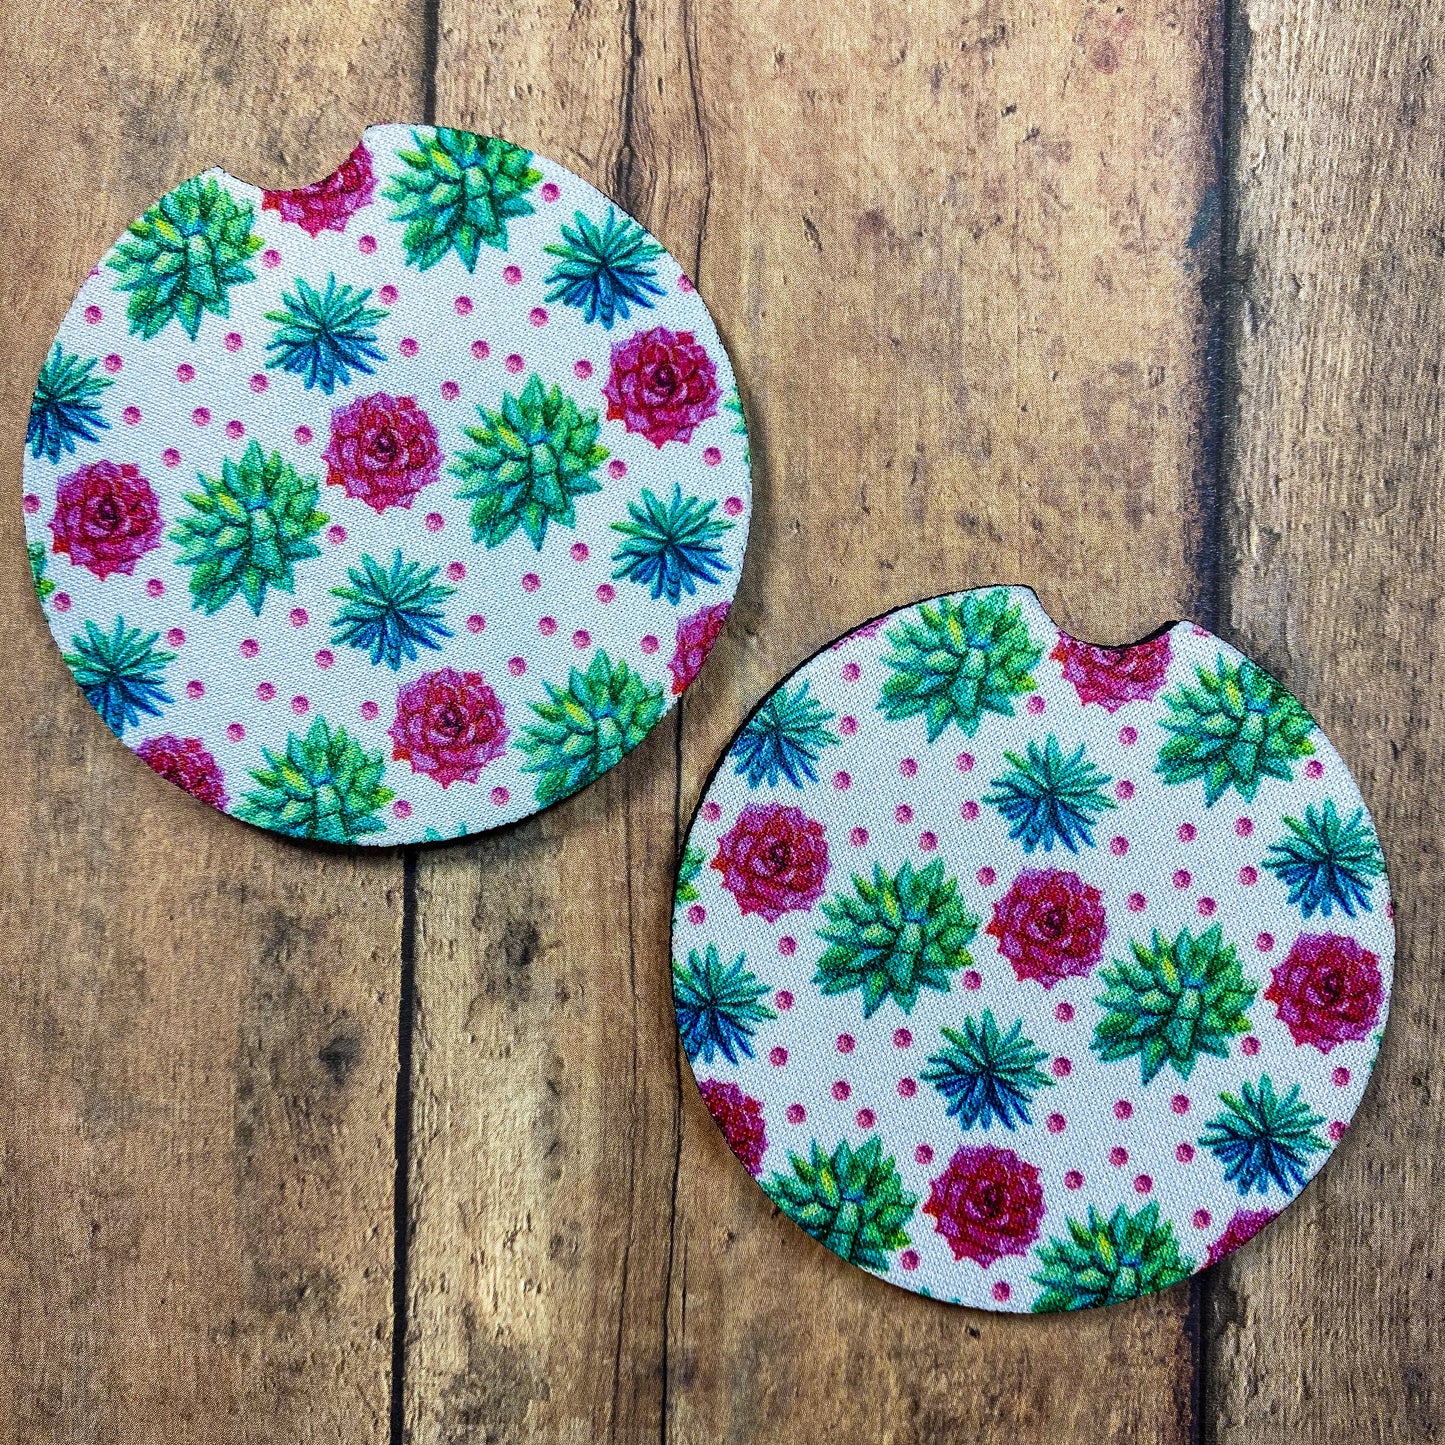 Succulent Car Coasters, Coasters for Car, Car Accessories, Fabric Car Cup Holder Decor, Rubber Backing, Divot